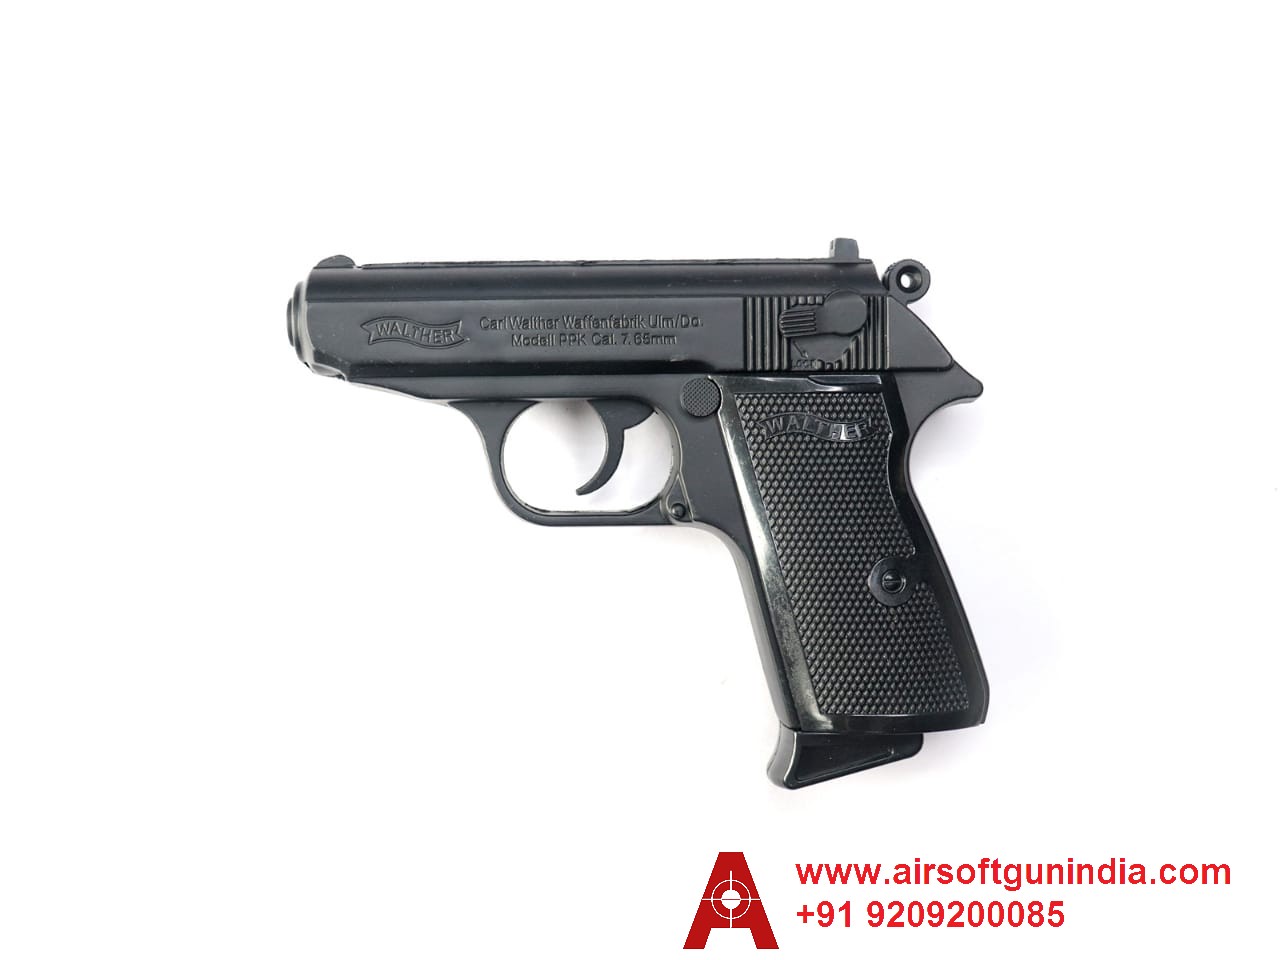 WALTHER PPK BLACK REPLICA LIGHTER BY AIRSOFT GUN INDIA